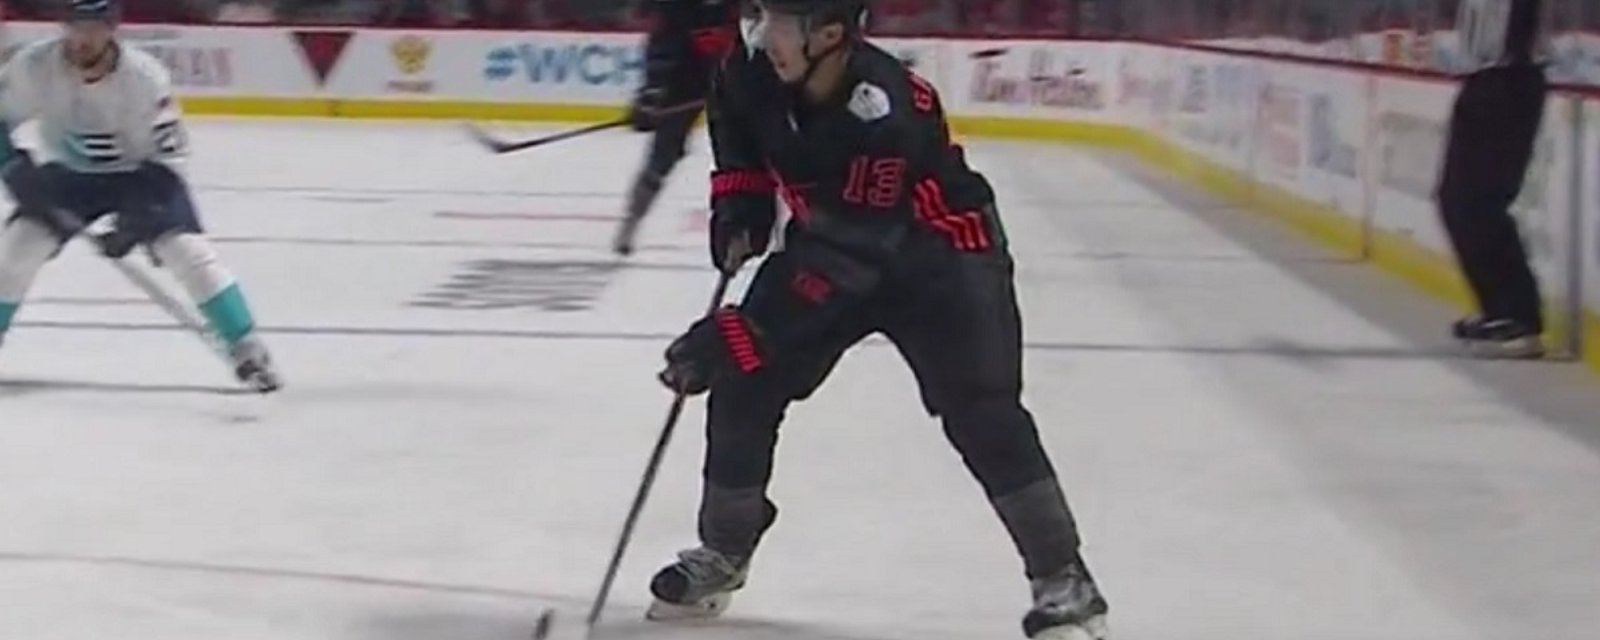 Johnny Gaudreau's ridiculous deke and goal from the World Cup.